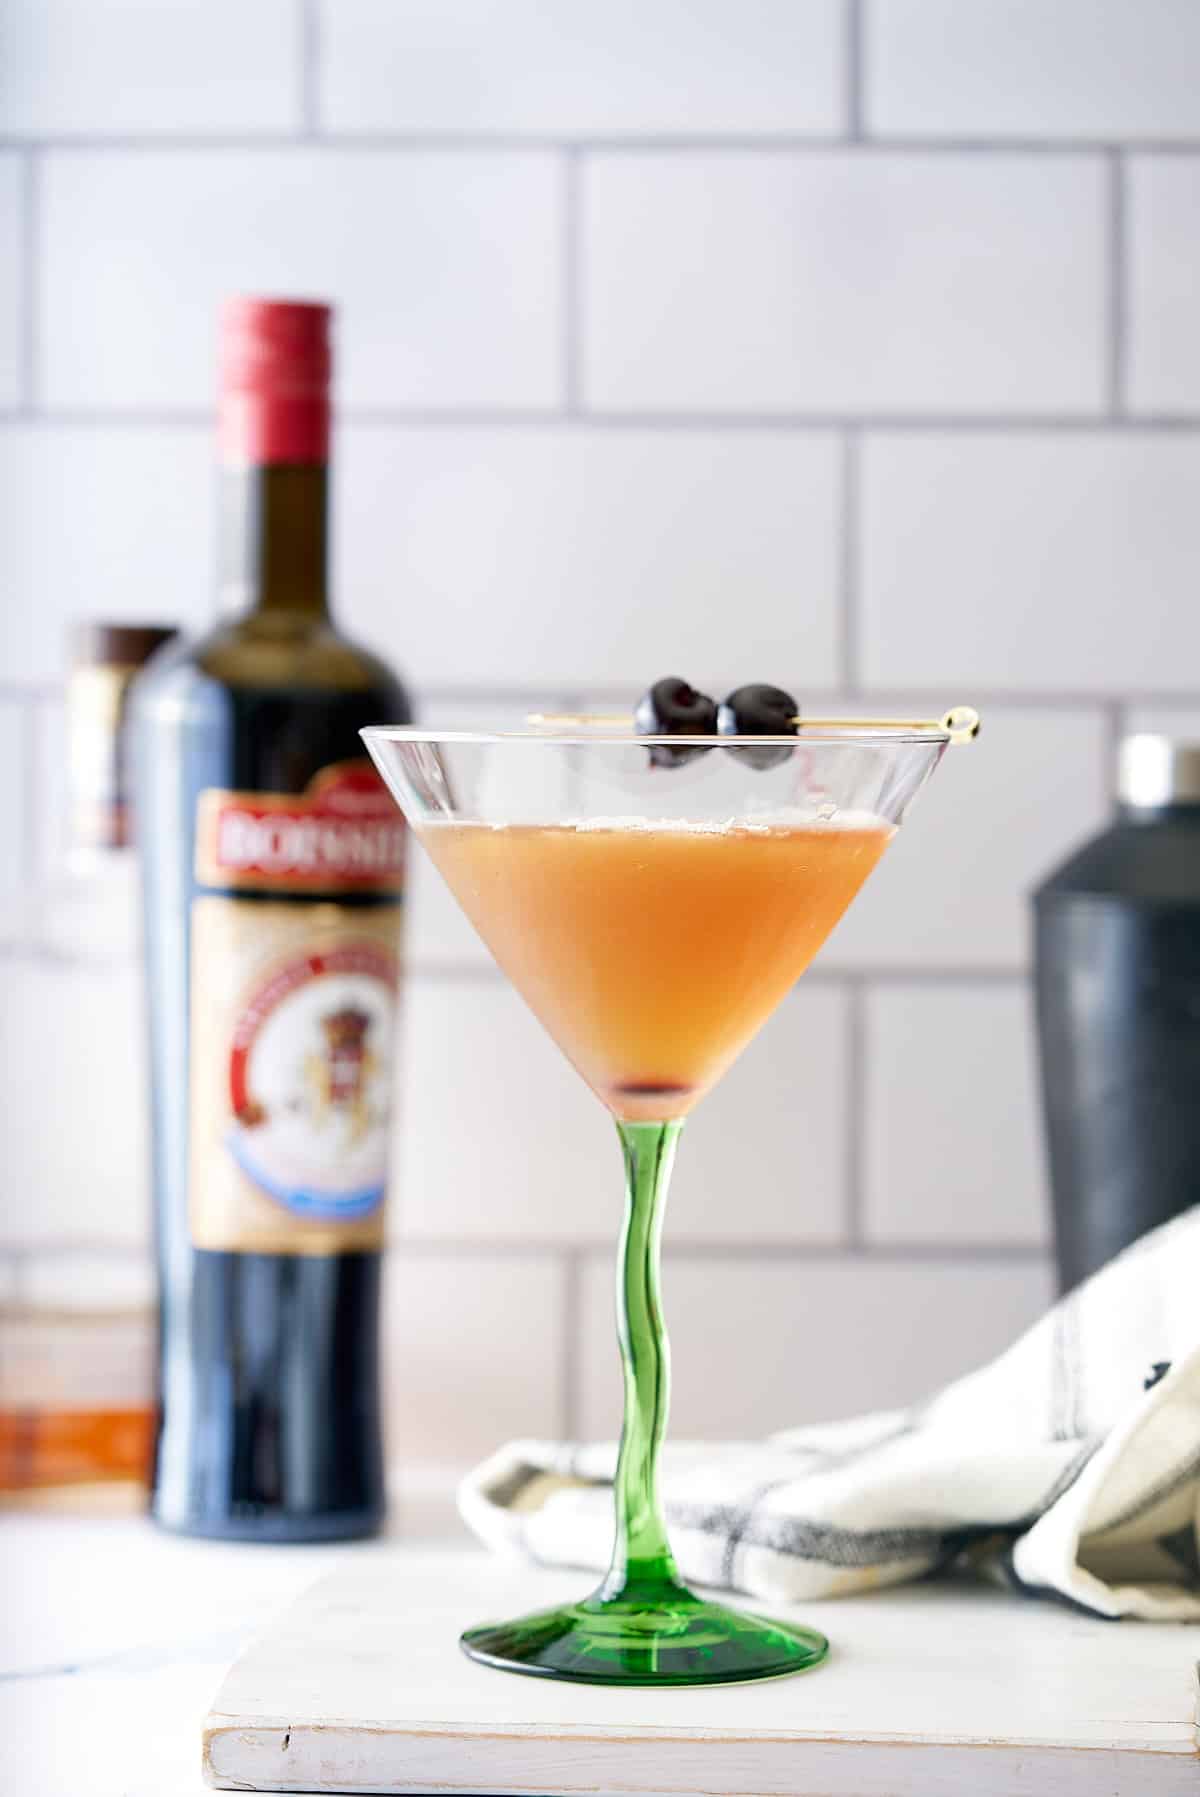 A bourbon martini cocktail in a cocktail glass served with two cocktail cherries, with a bottle of bourbon and cocktail shaker in the background.